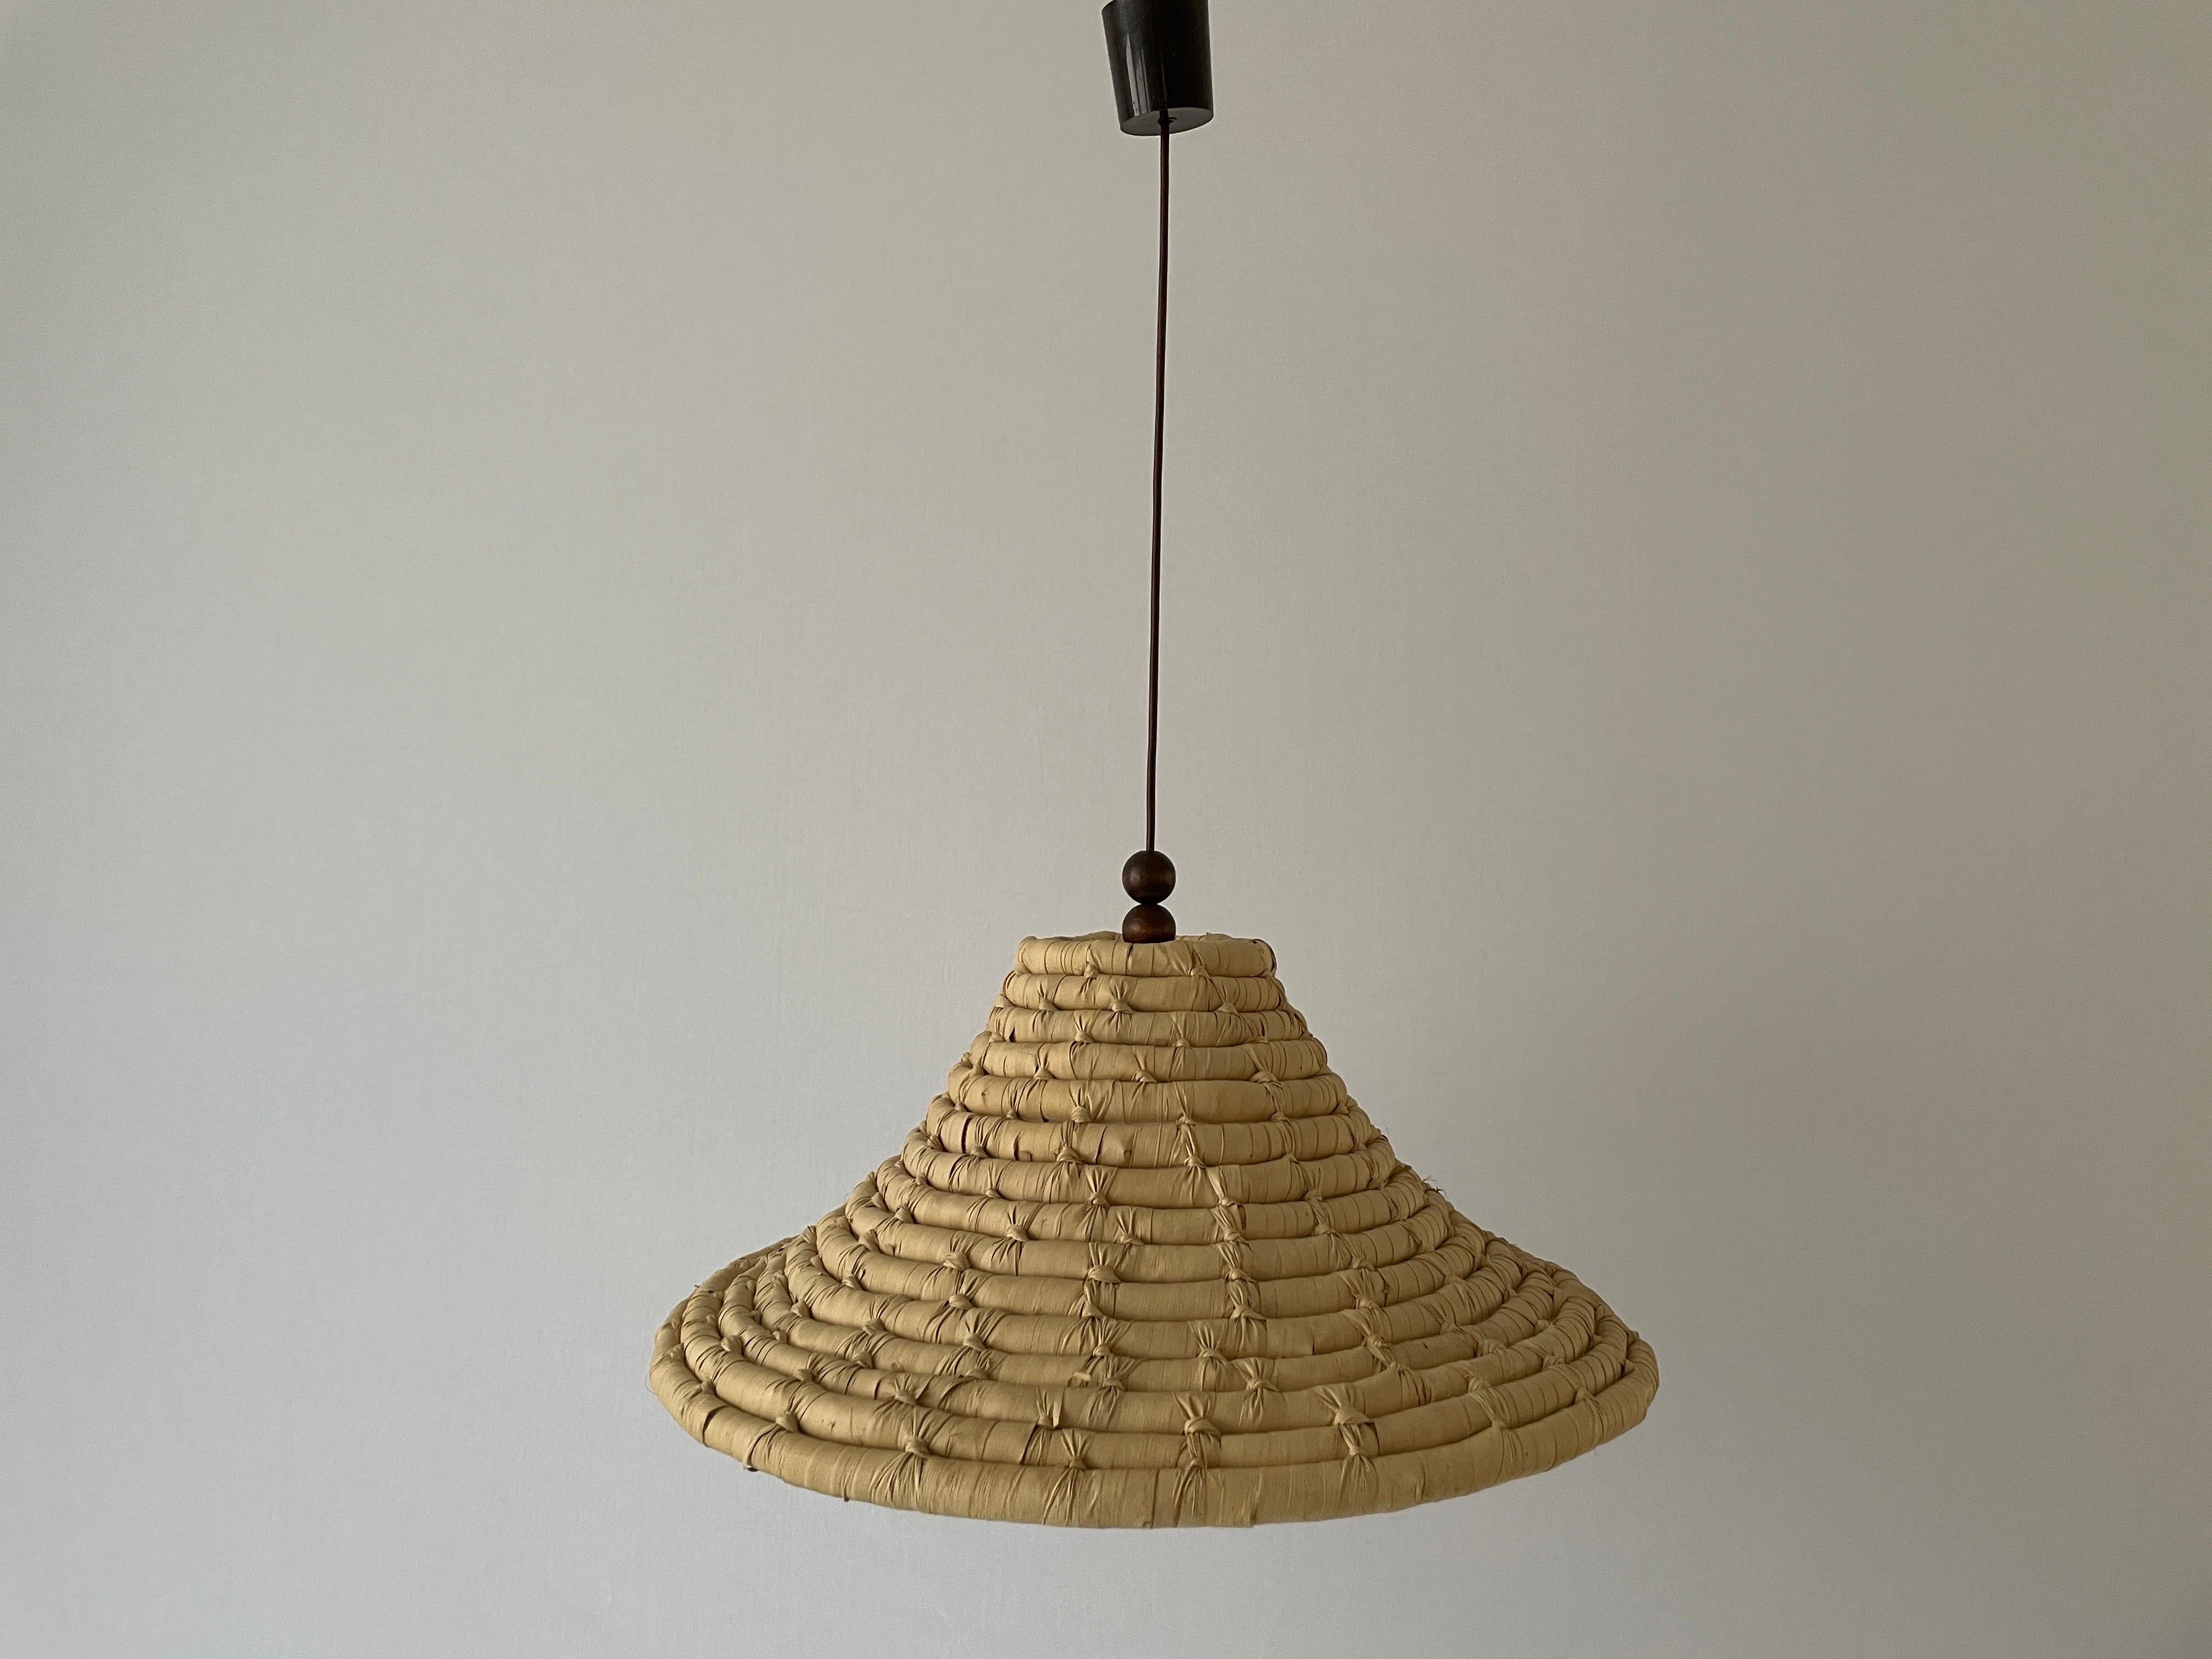 Unusual Large Made of Natural Plant Material Pendant Lamp, 1960s, Germany For Sale 1